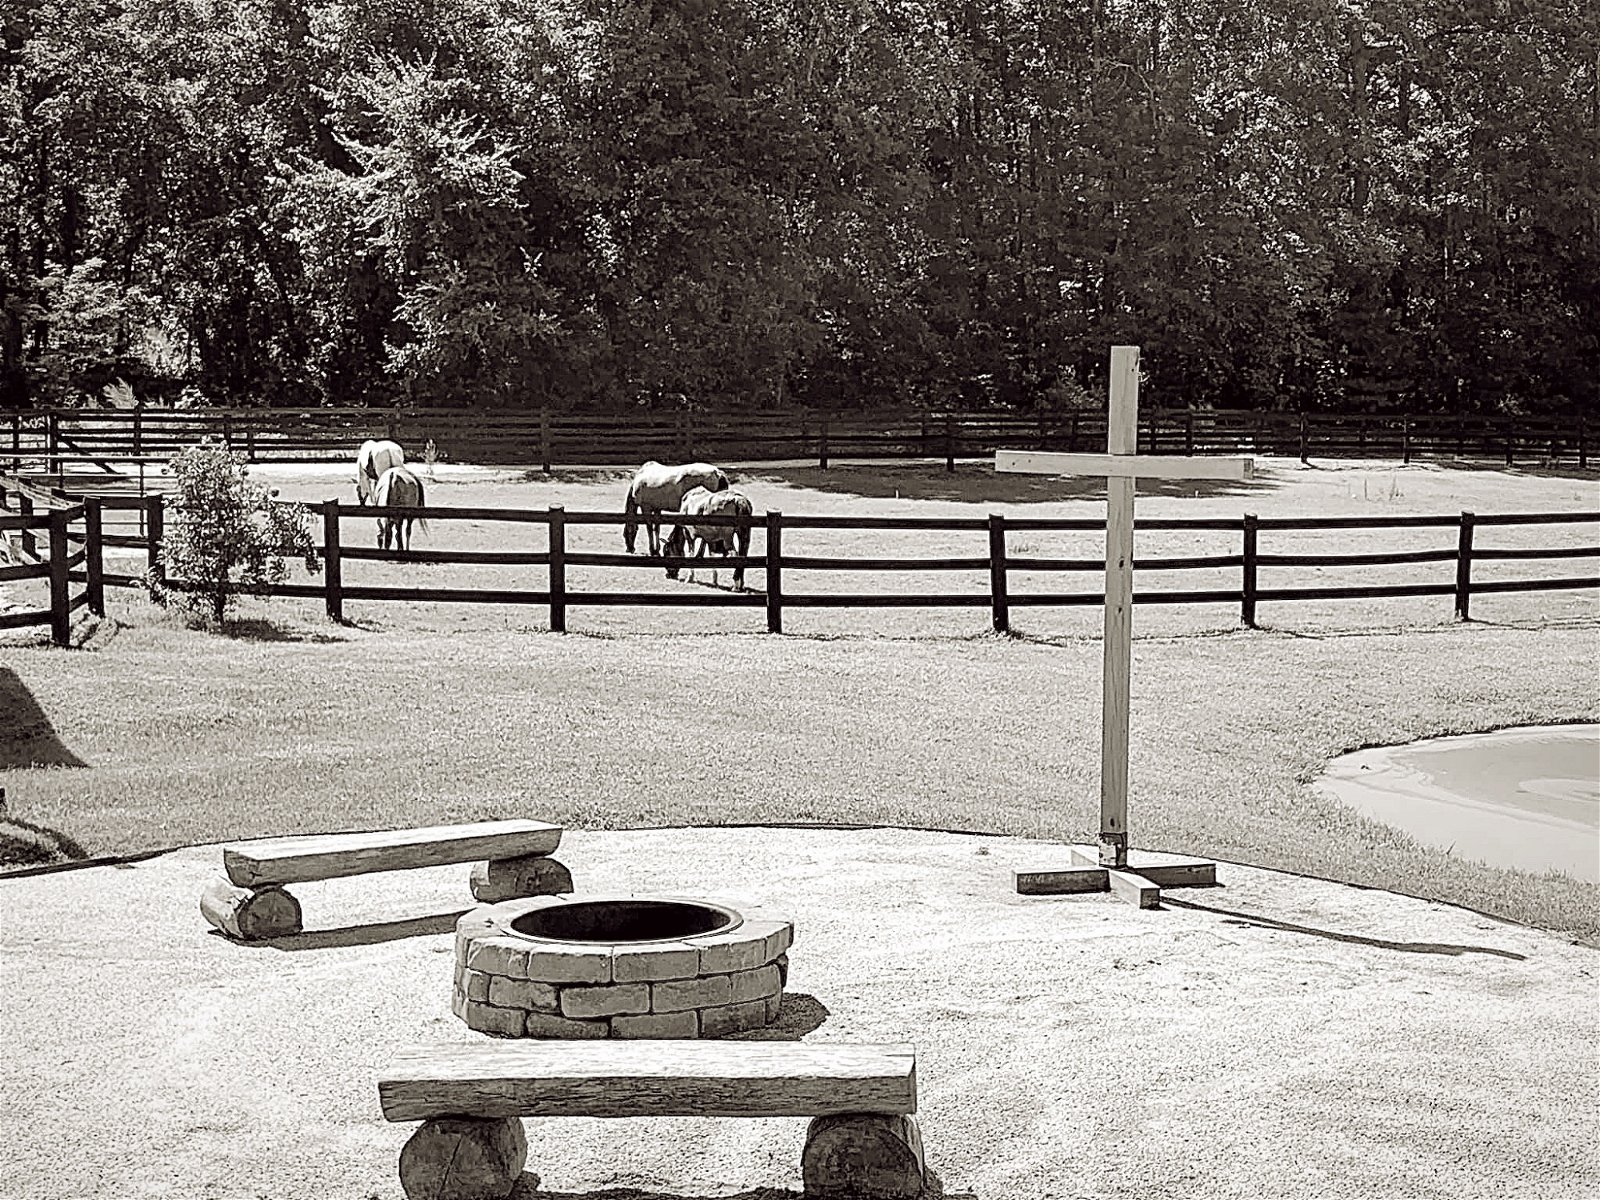 Black and white picture of a sweet outdoor chapel area with a cross; horses in the background